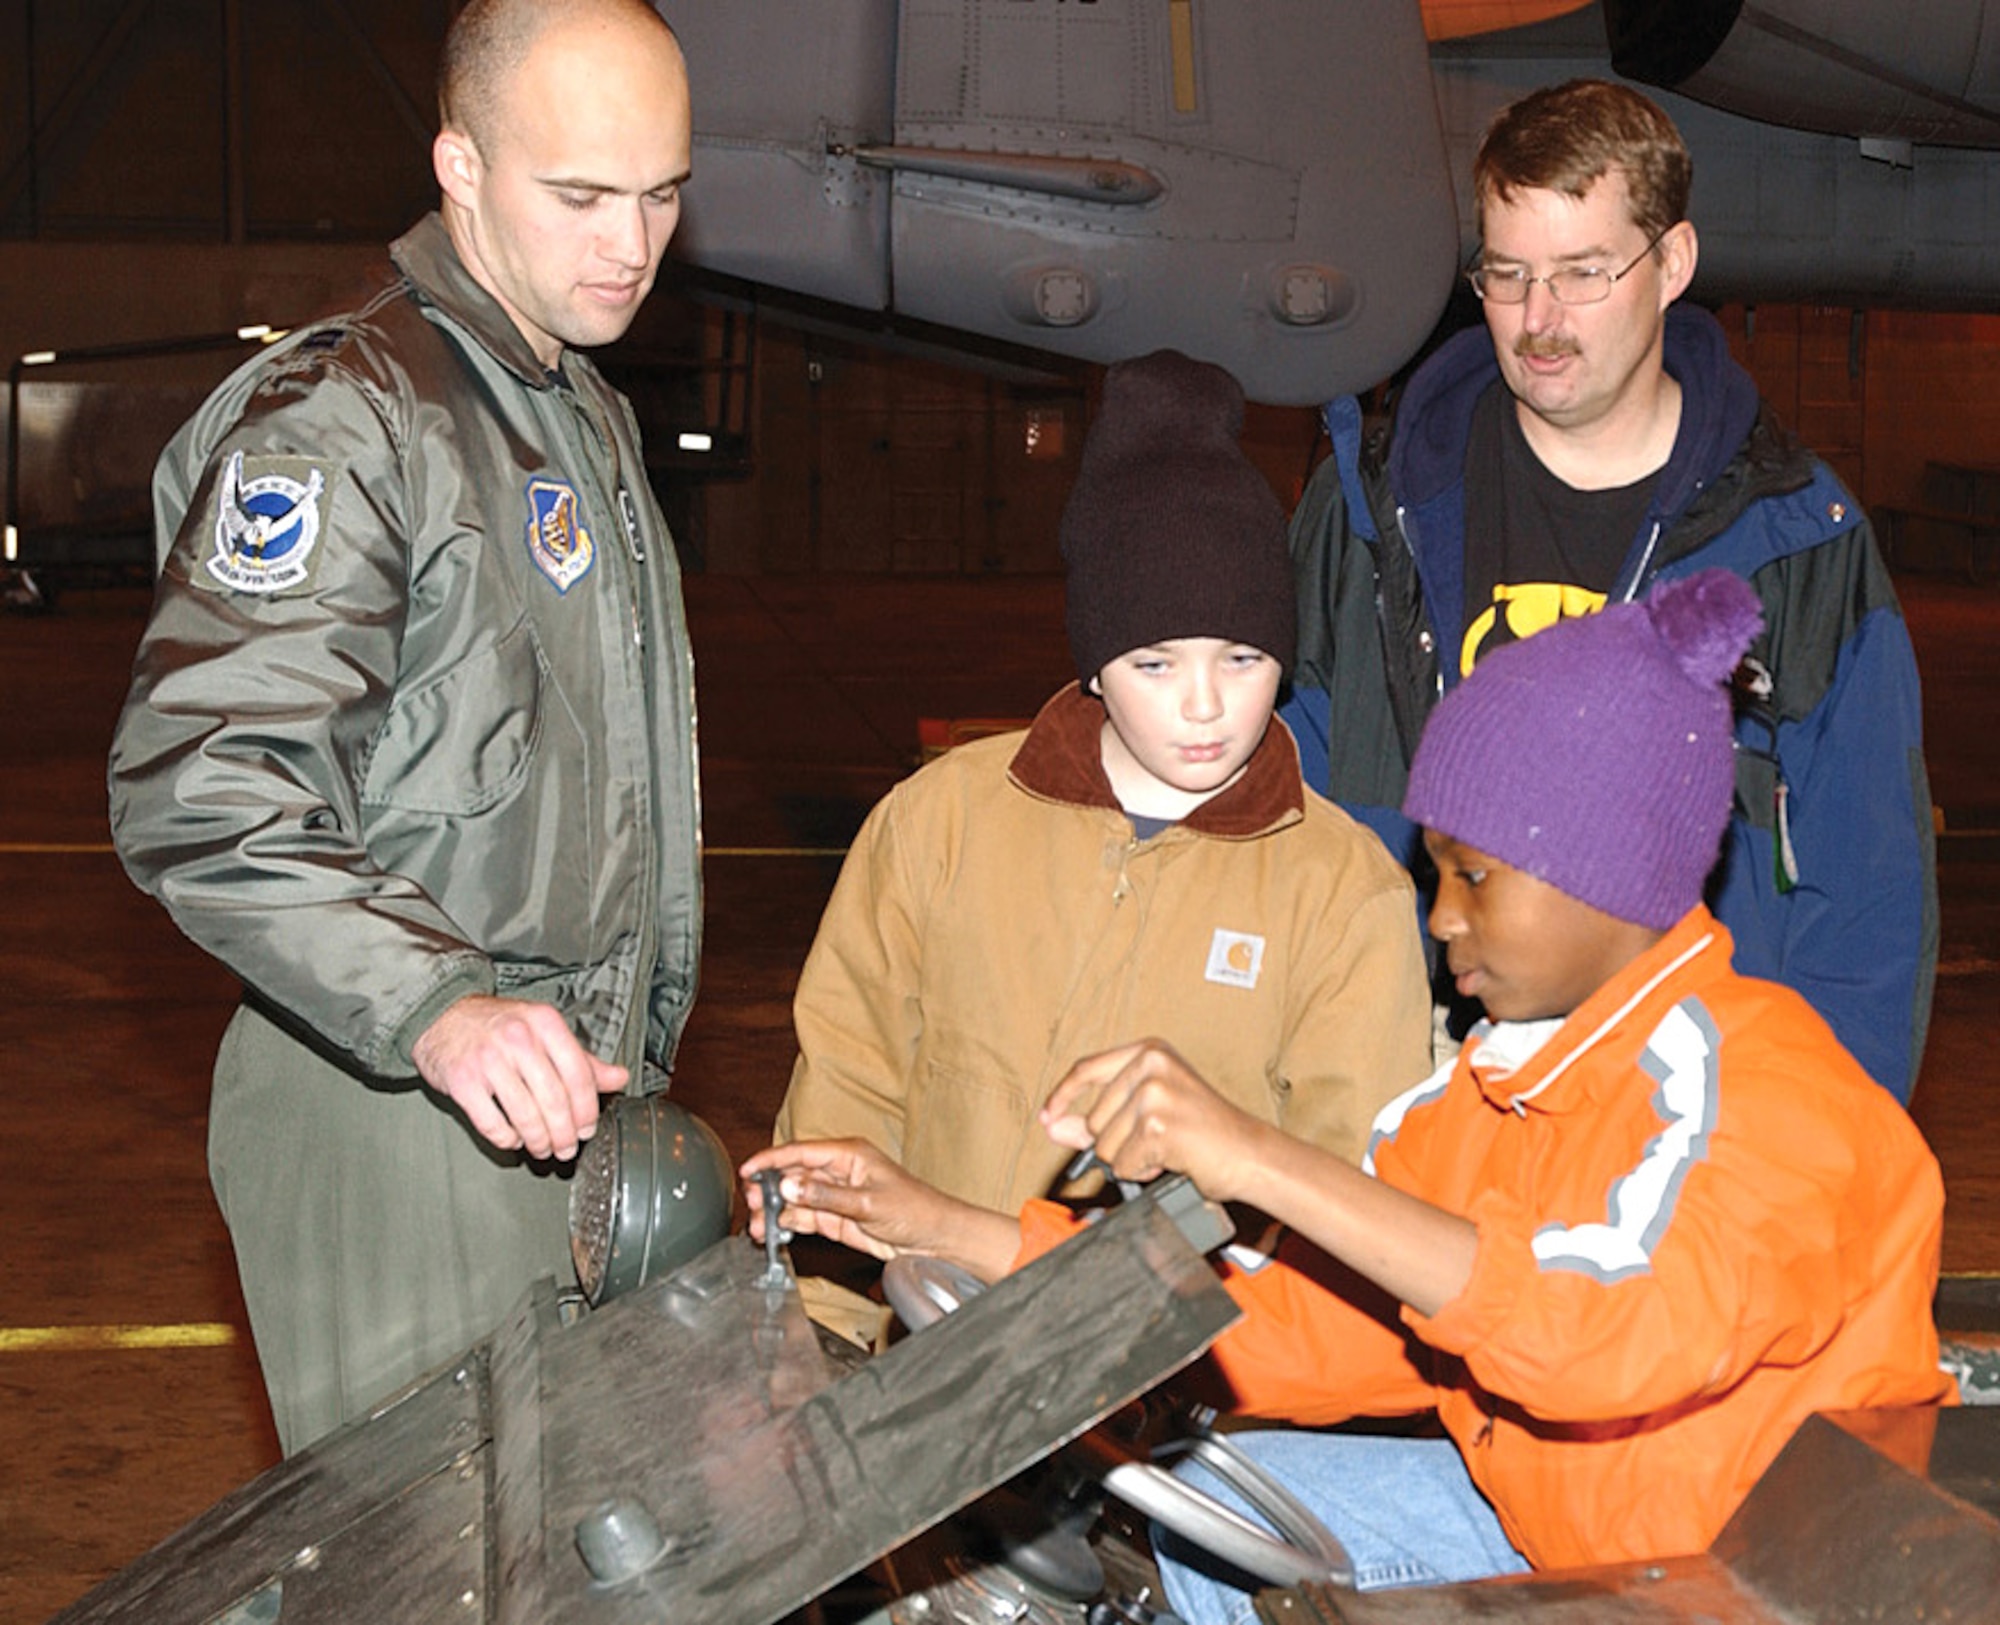 Capt. Travis Burton explains the functions of an MJ-1 vehicle used to load munitions onto aircraft Sept. 30 at Eielson Air Force Base, Alaska. The captain is a pilot with the 355th Fighter Squadron. (U.S. Air Force photo/Amn. Christopher Griffin)